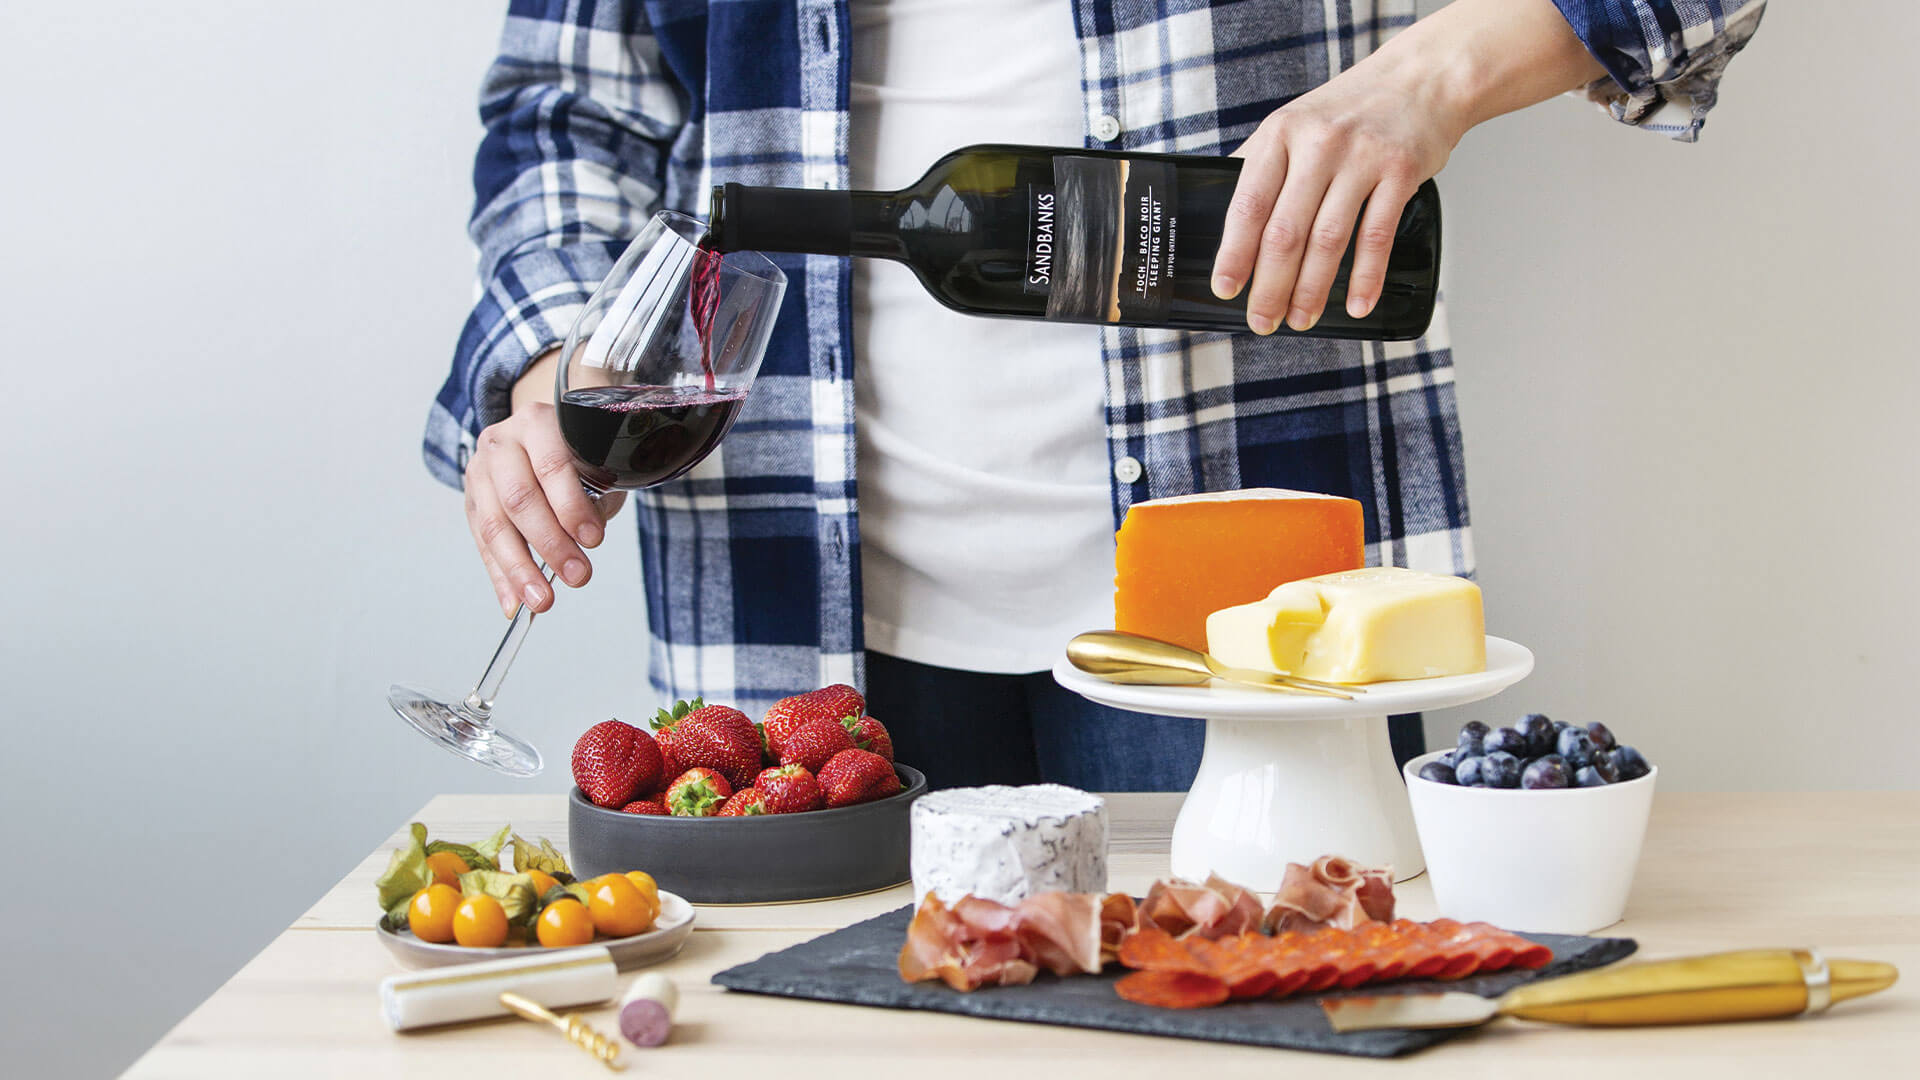 Person pouring a glass of Sandbanks red wine to pair with cheese, cured meat, and berries.  